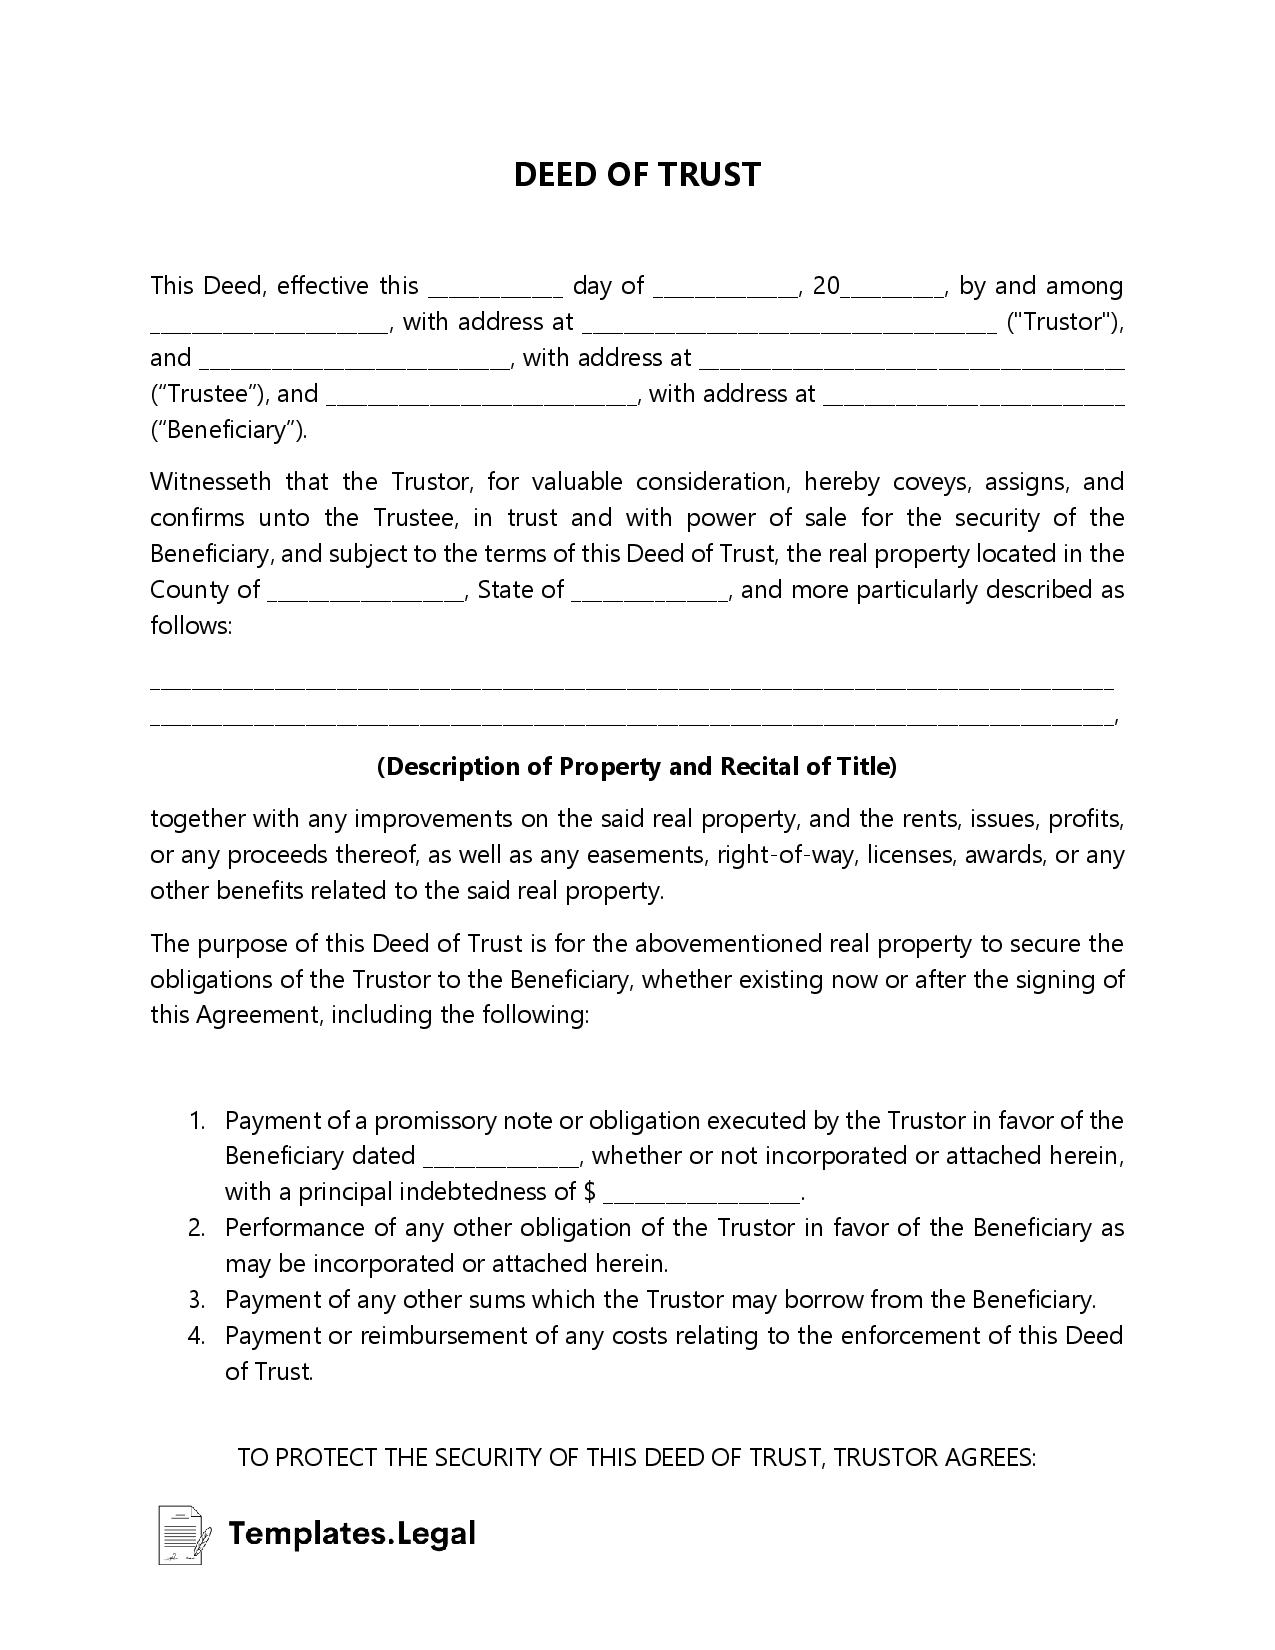 Deed of Trust - Templates.Legal